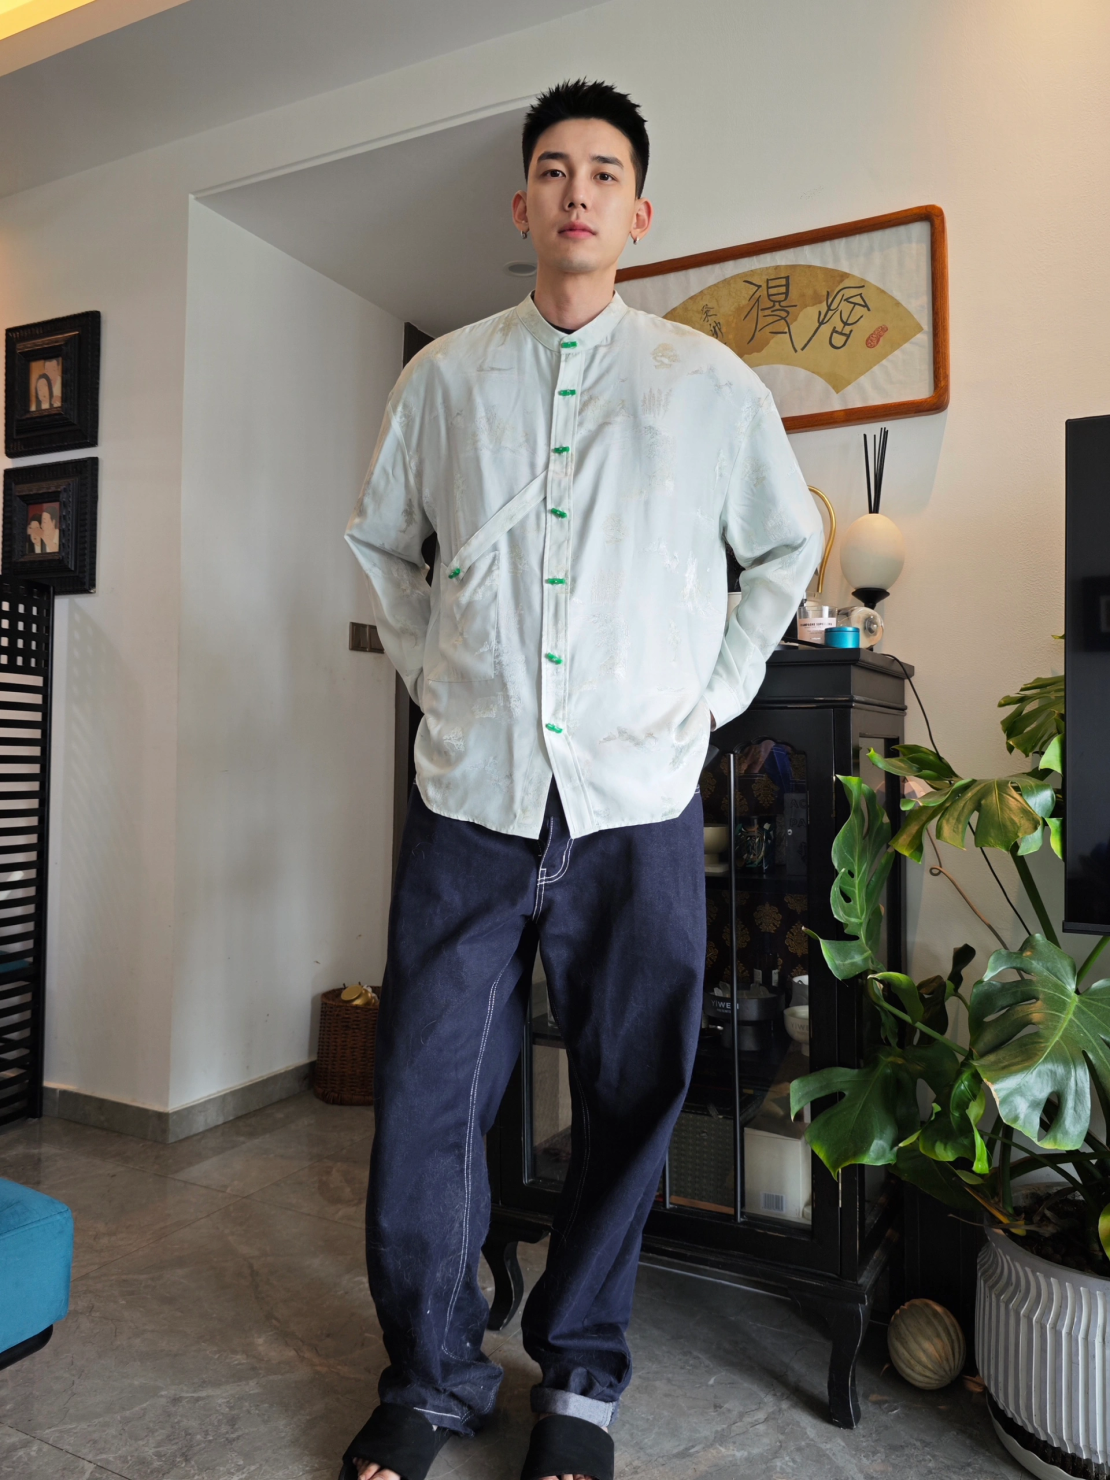 Designer Huang Weizhe, who goes by Azhe online, often posts ideas about how to embrace the "new Chinese style" trend.